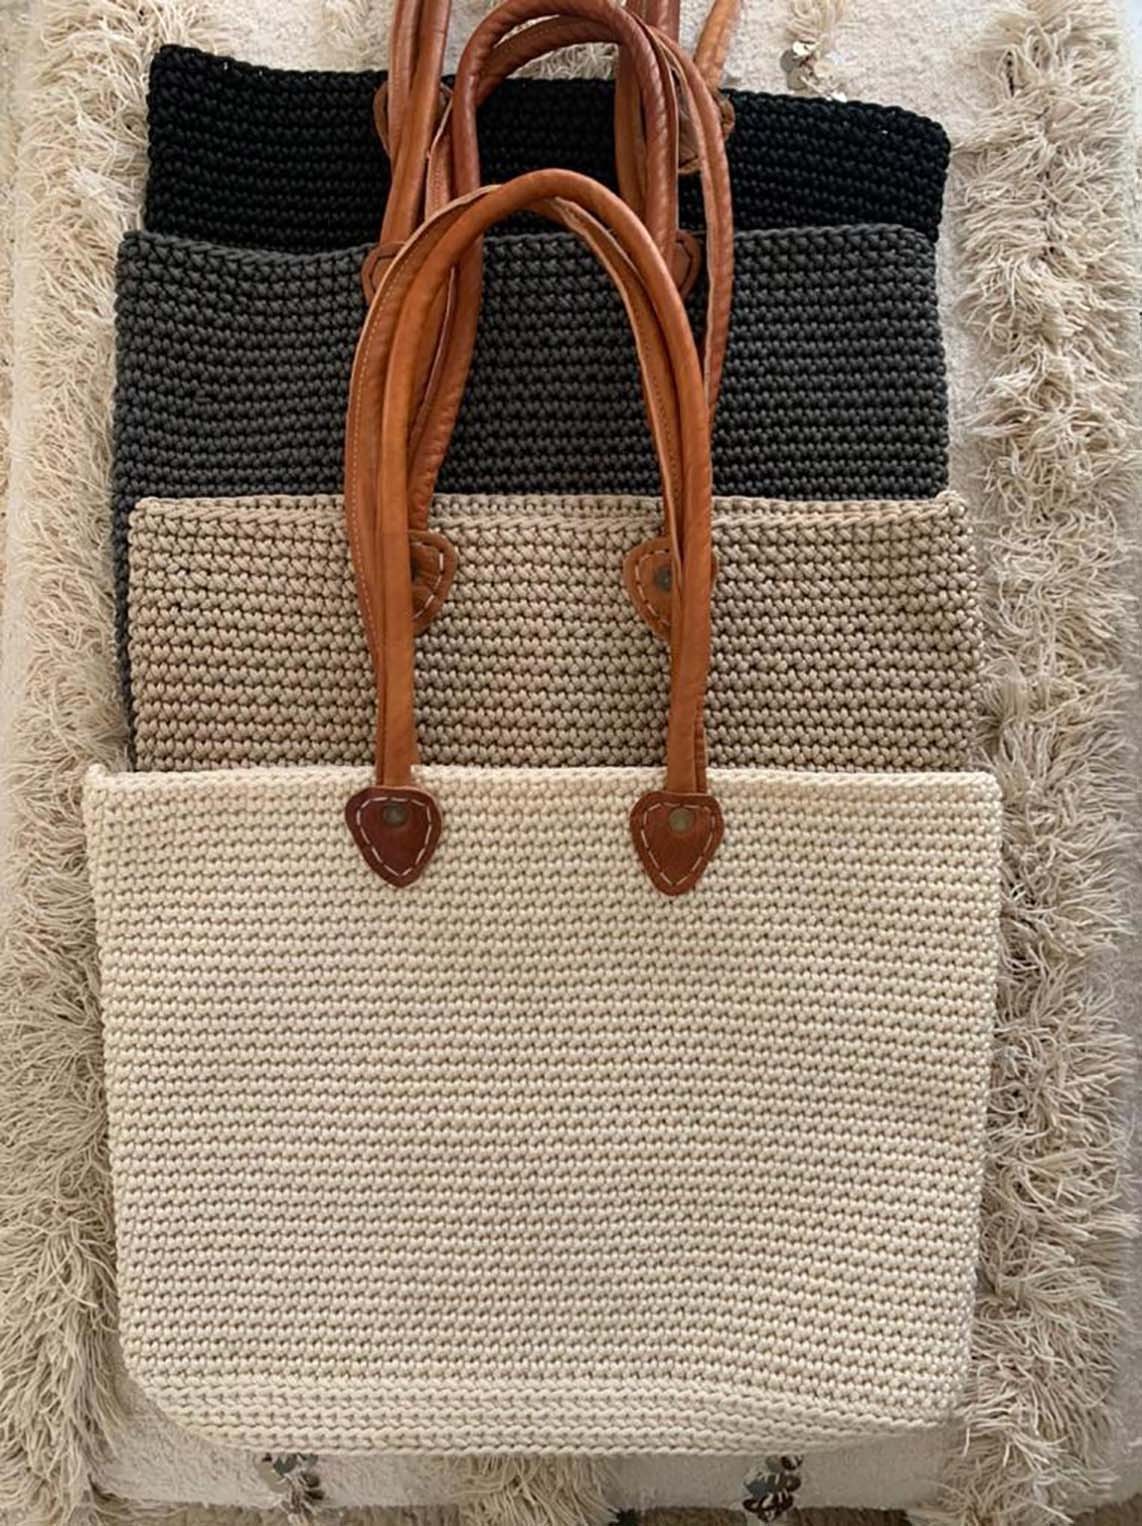 Rectangular Cotton Crochet Tote with Leather Handles - Scents & Feel